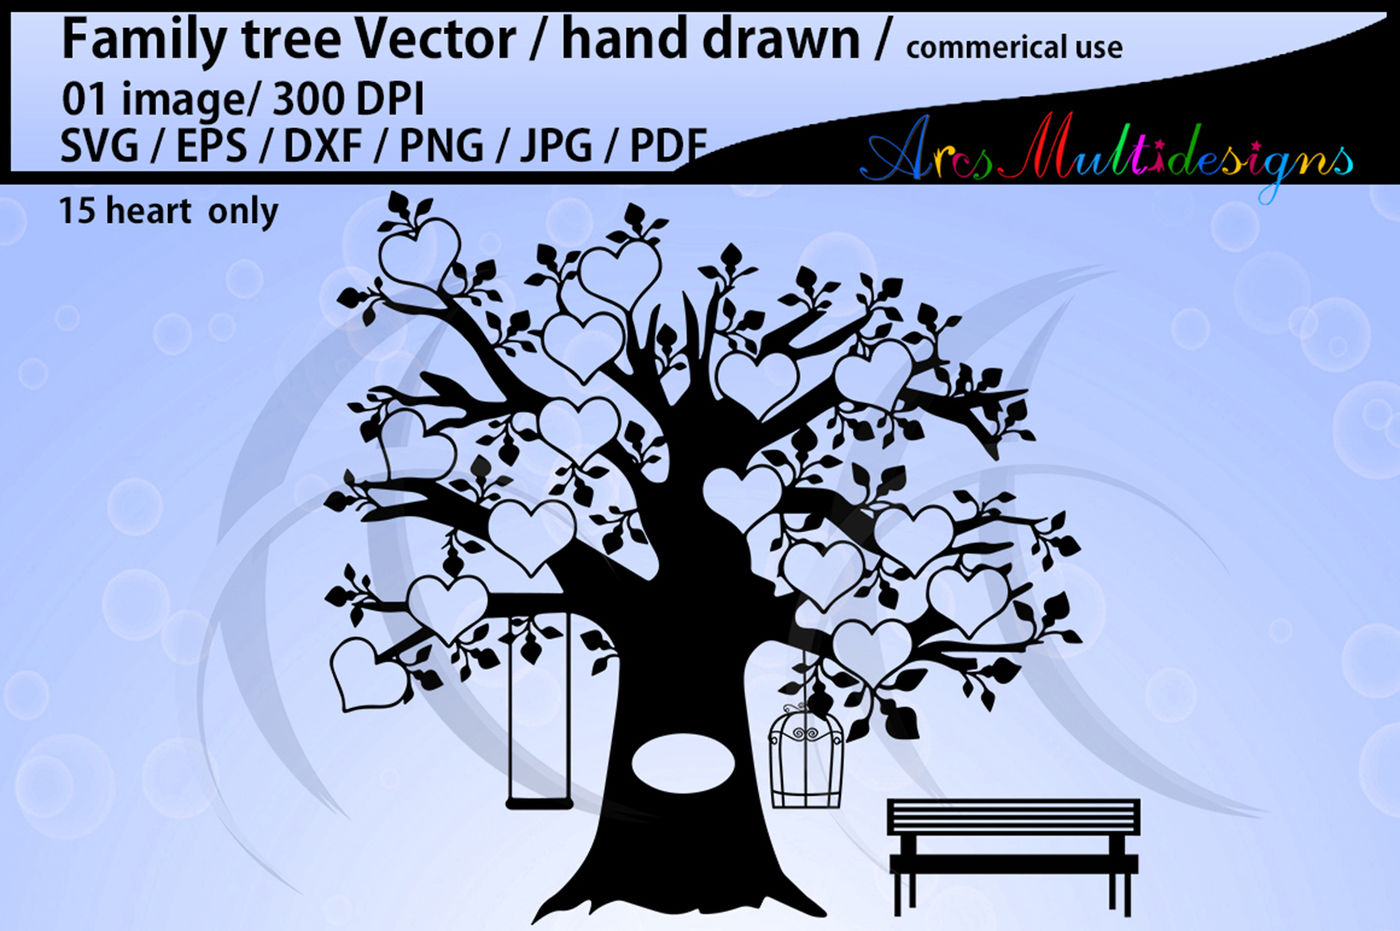 Download Family Tree Clipart Svg Eps Dxf Png Pdf Family Tree Silhouette By Arcsmultidesignsshop Thehungryjpeg Com